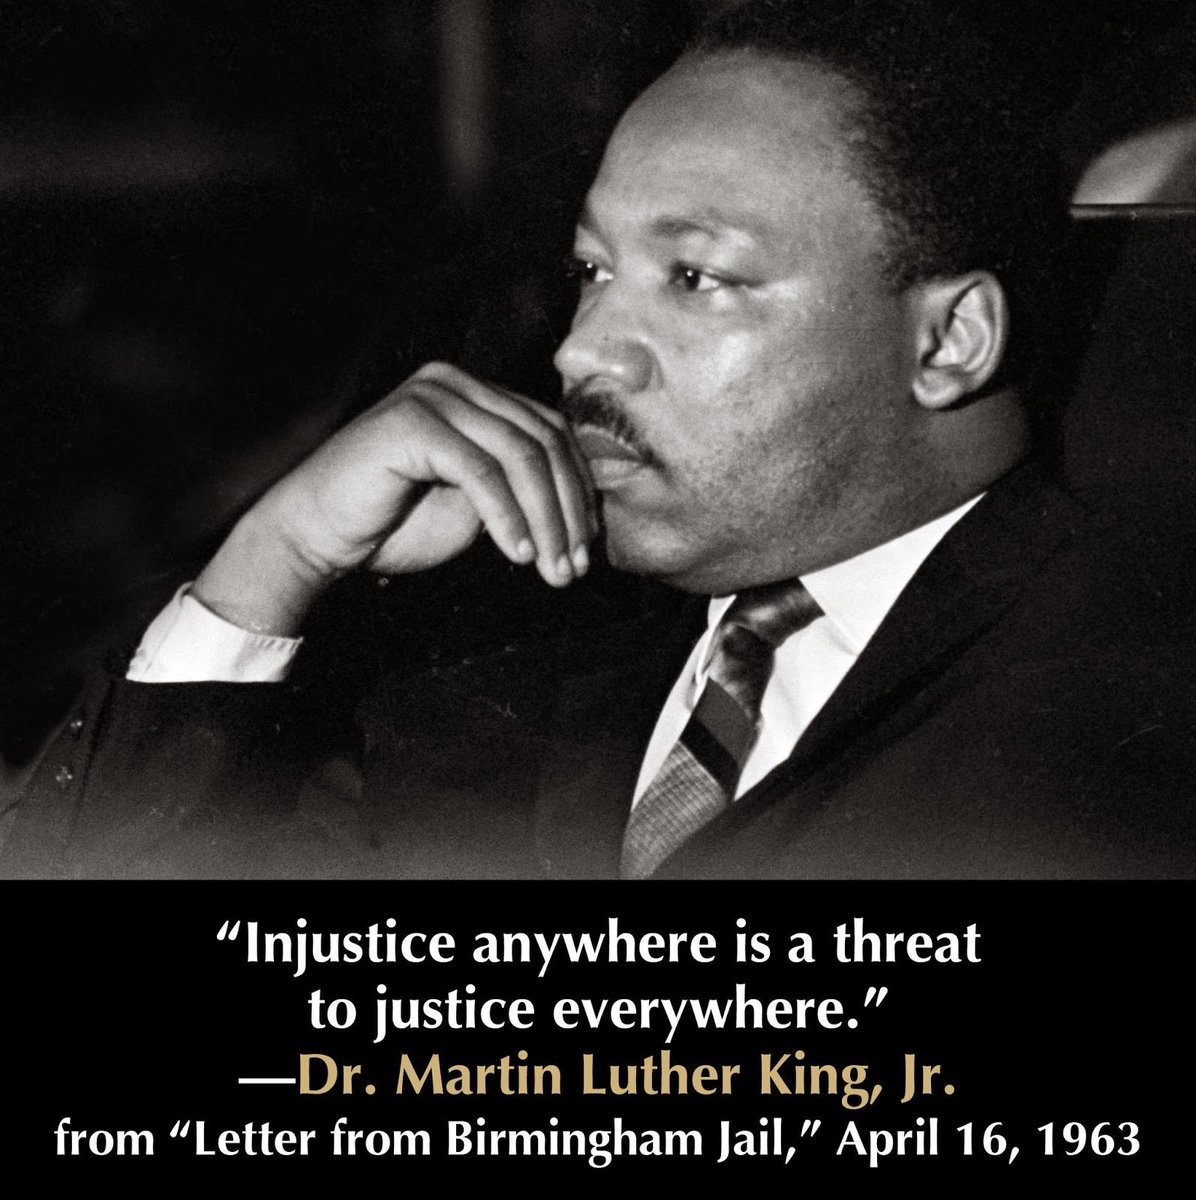 Honoring Dr. King’s example & resolve. An eternal legacy of Inspirational Leadership in its highest form.